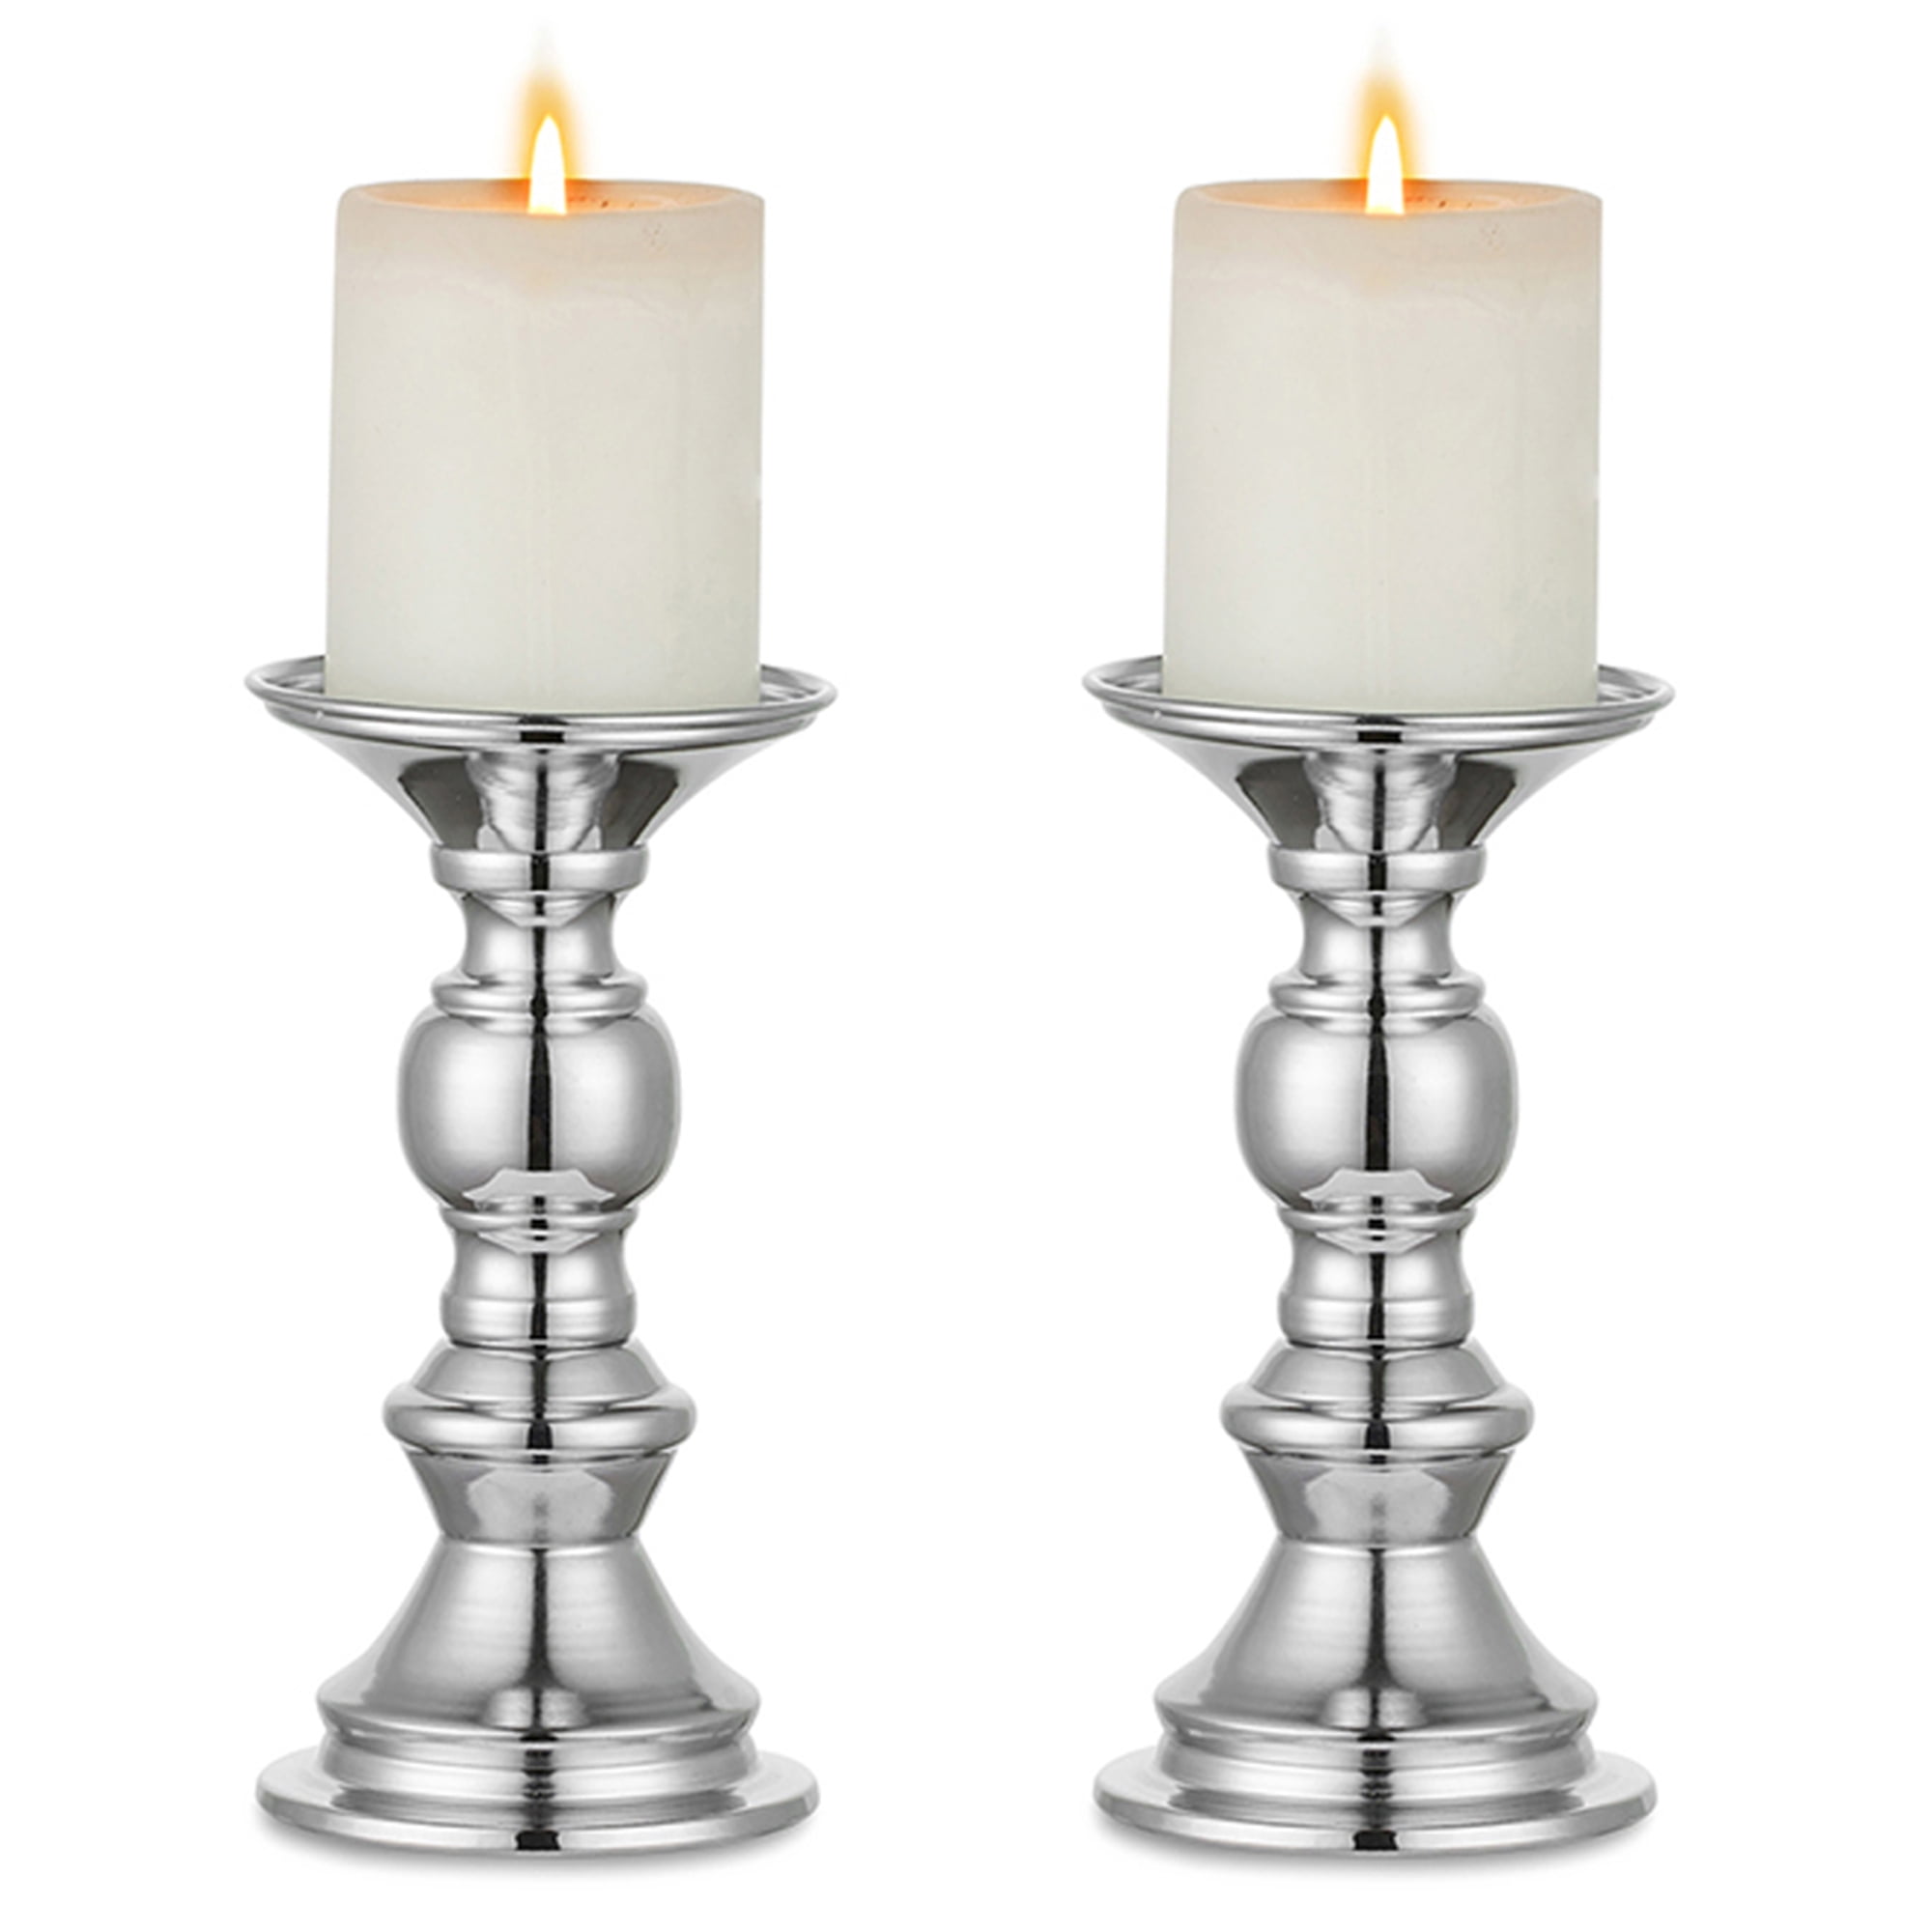 CANDLE HOLDERS Set of 2 WEDDING Hanging Chandelier Votive 17" CENTERPIECES NEW 